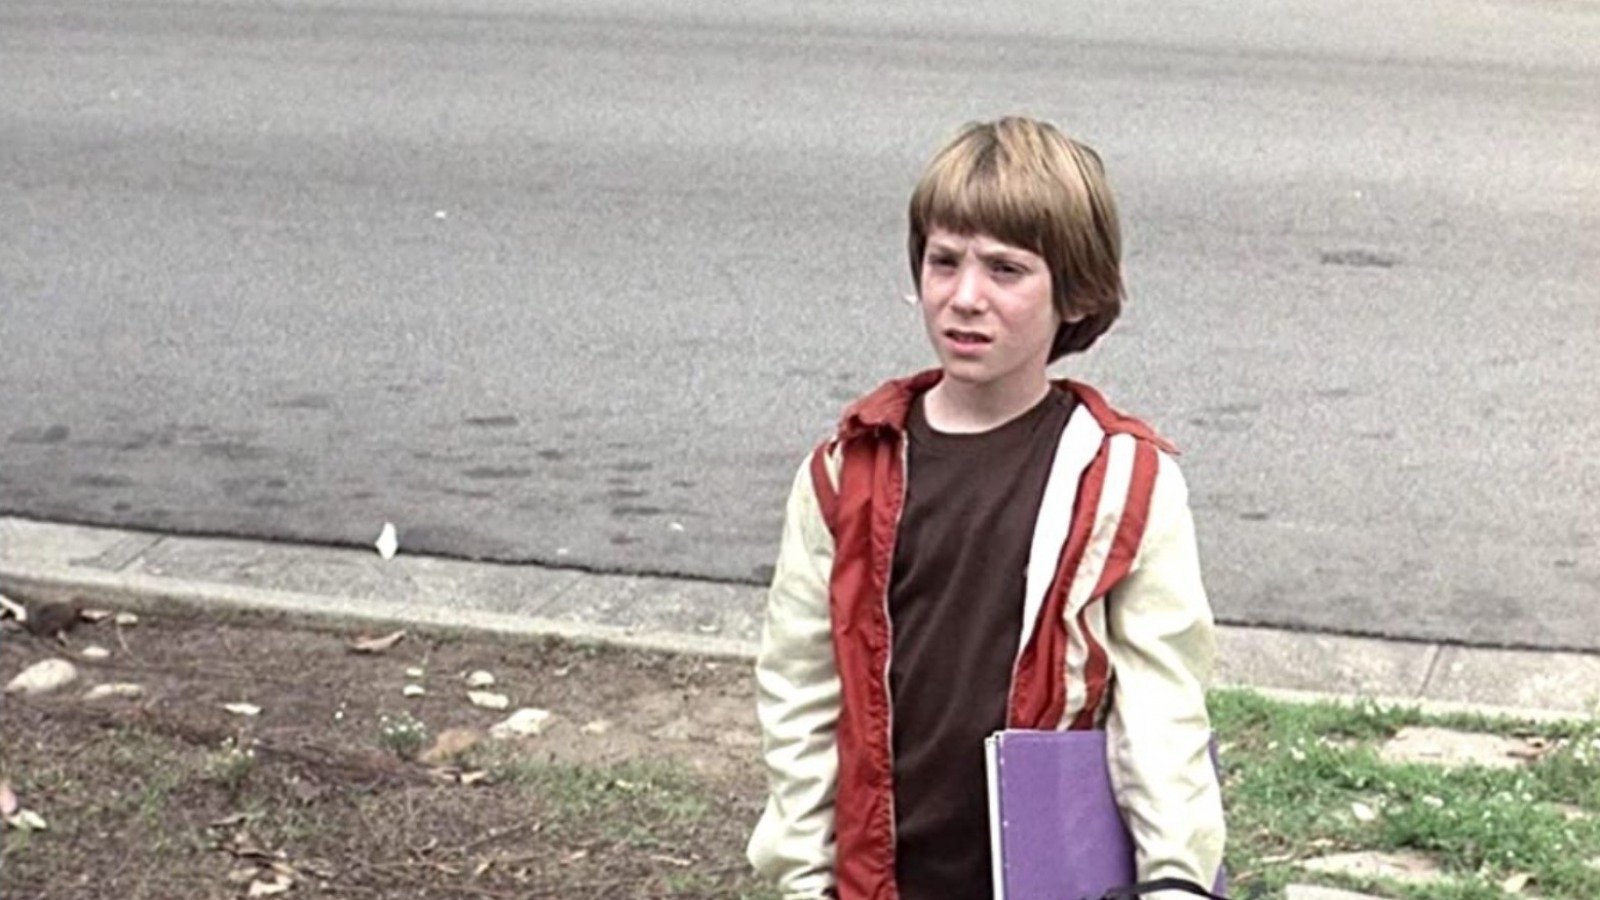 The Little Boy Who Played Tommy In Halloween Is Unrecognizable Now